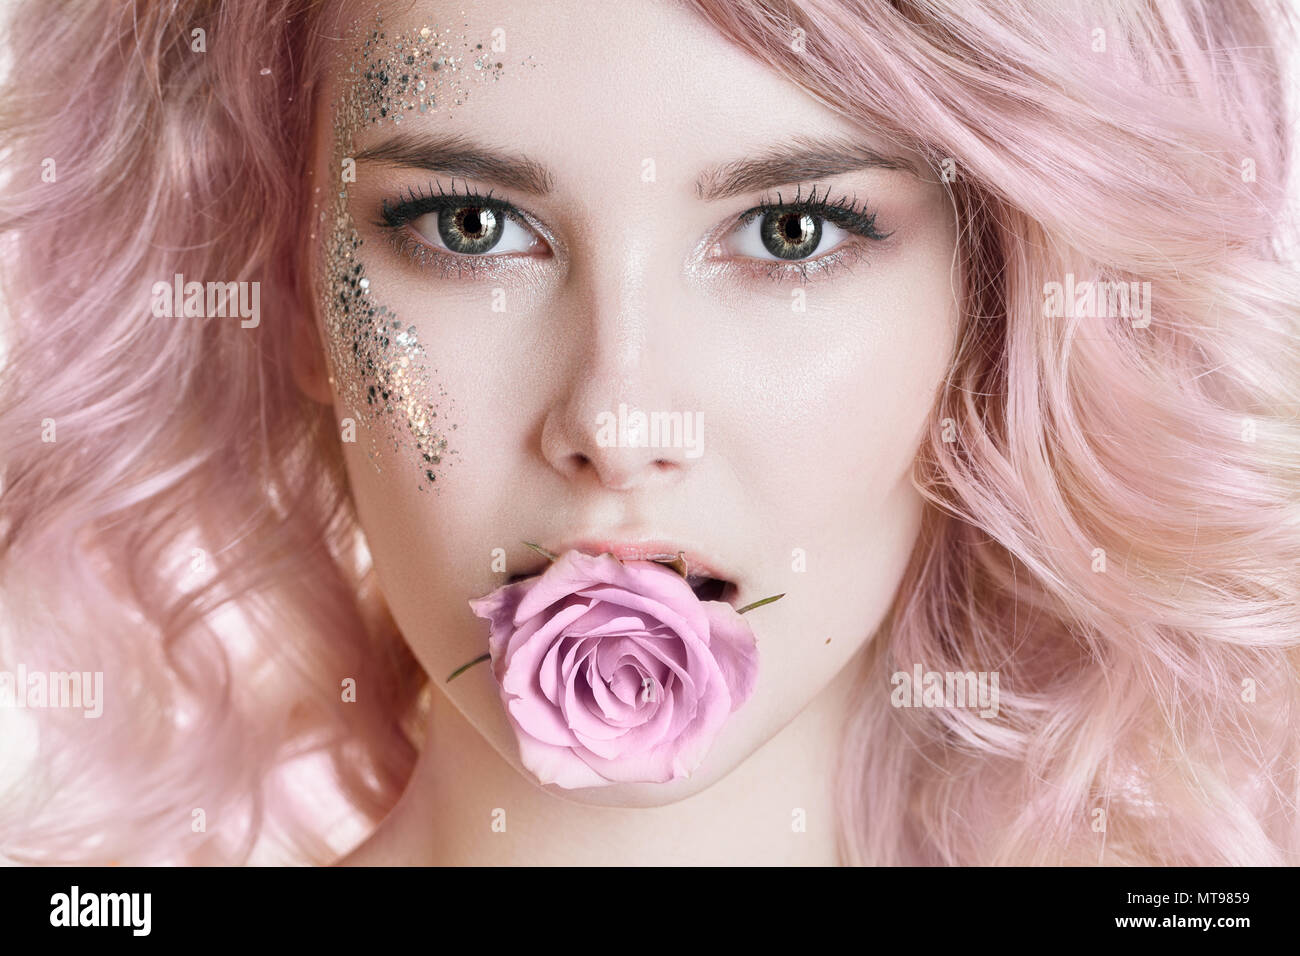 Colored hair. Beauty women portrait of young curly woman with pink hair, perfect art make-up with glitter. Rose in her mouth Stock Photo